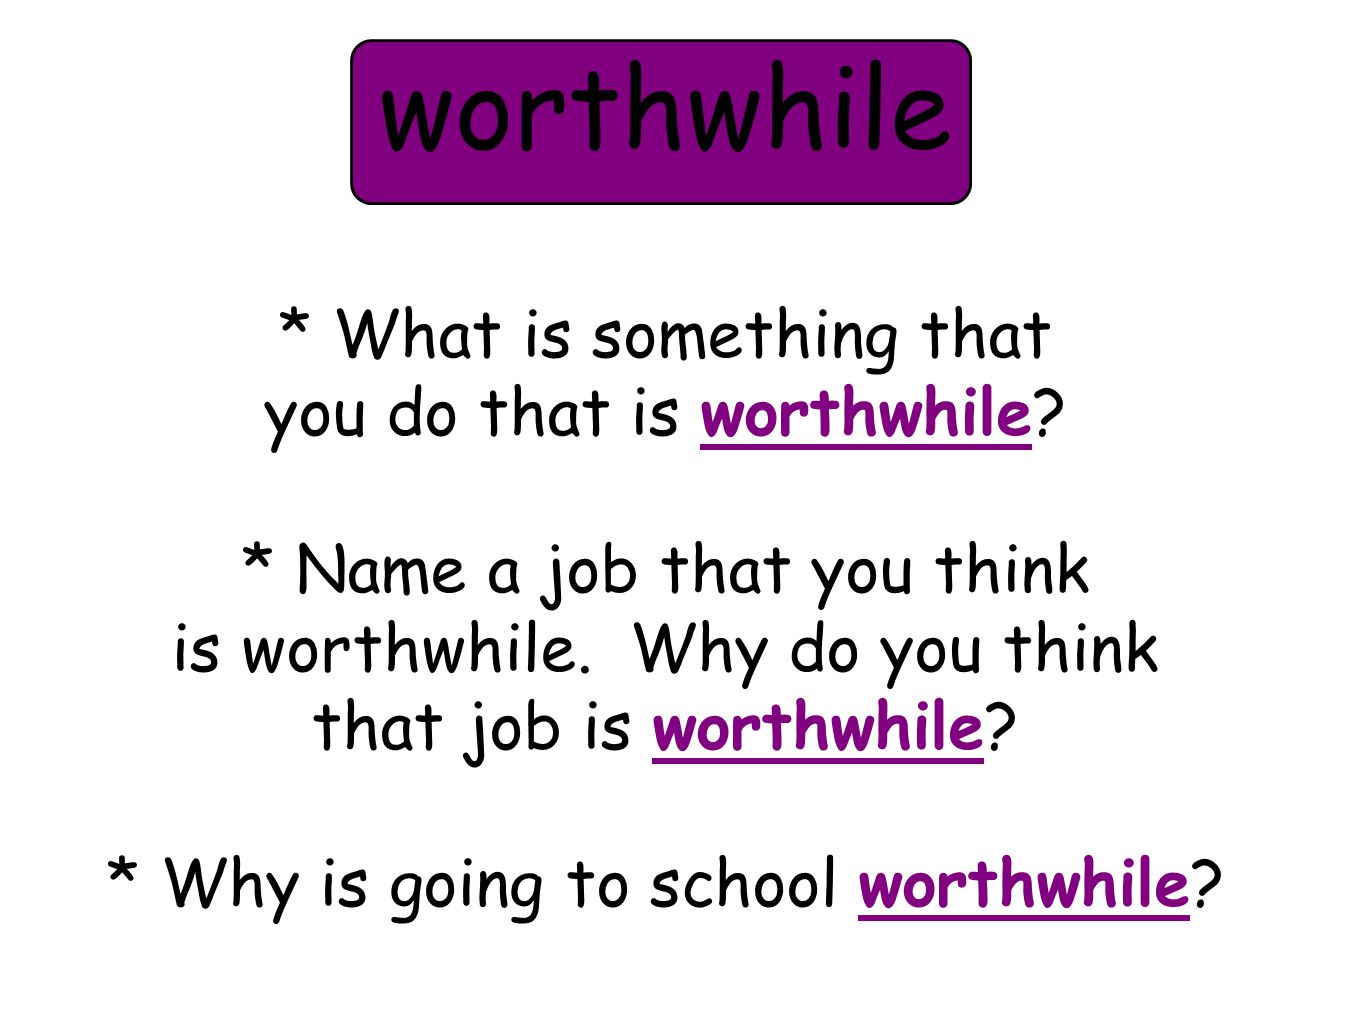 * What is something that you do that is worthwhile.